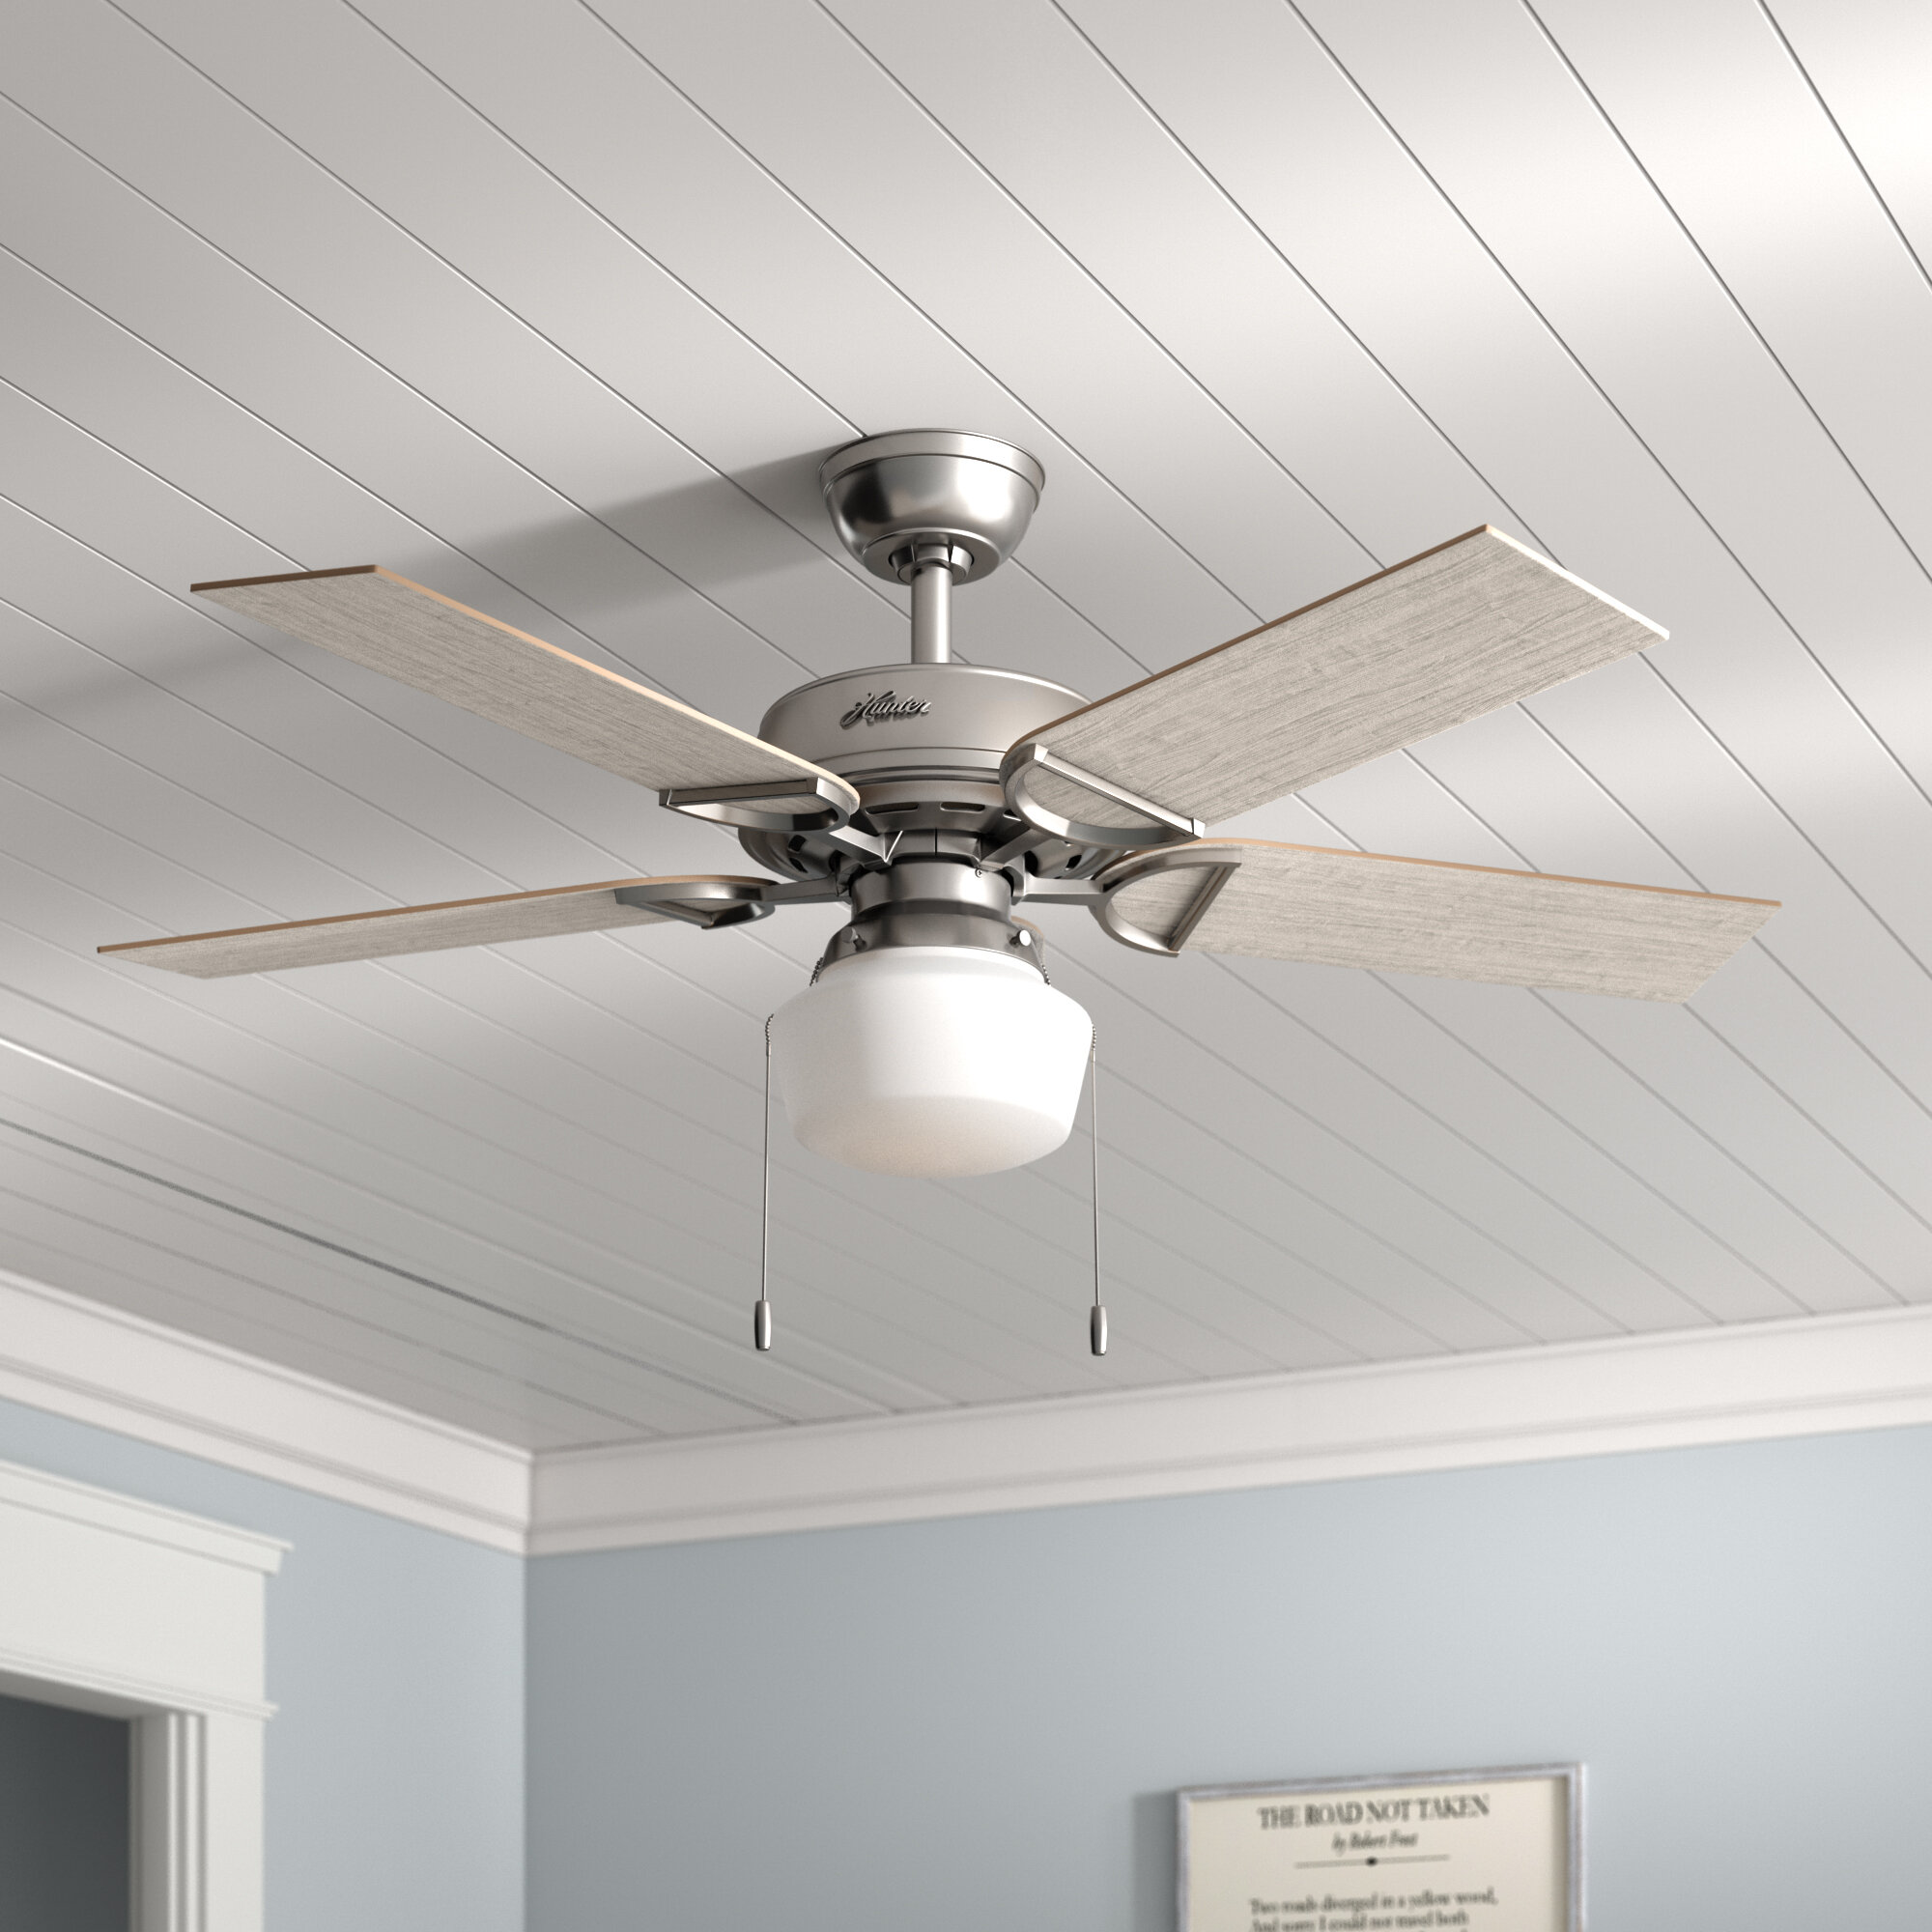 Hunter 52 in. Viola Ceiling Fan with Light (Brushed Nickel) 53419